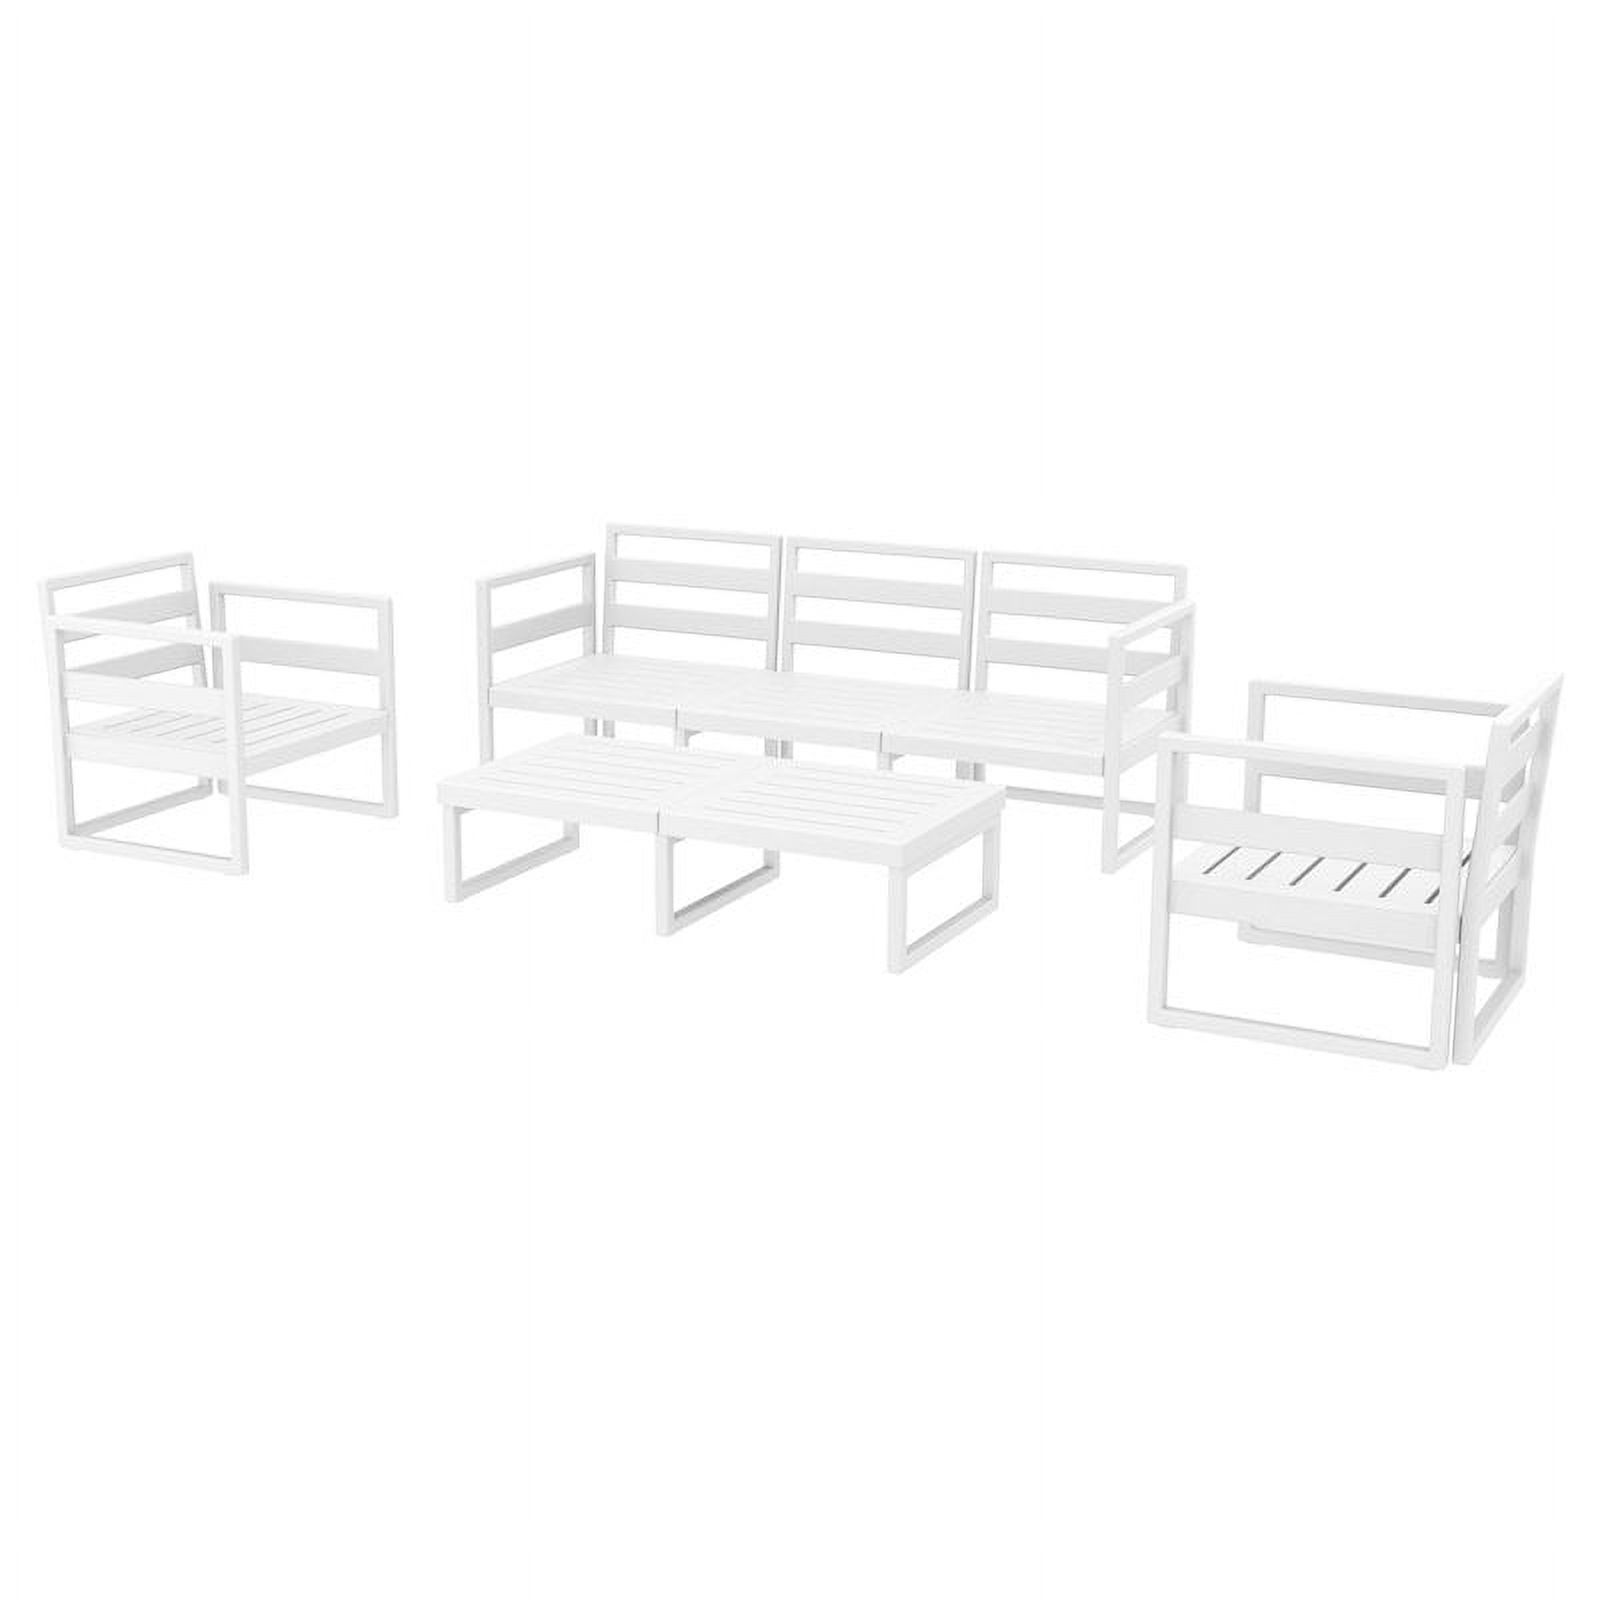 Mykonos 5 Person Lounge Set in White with Acrylic Fabric Taupe Cushions - image 3 of 3